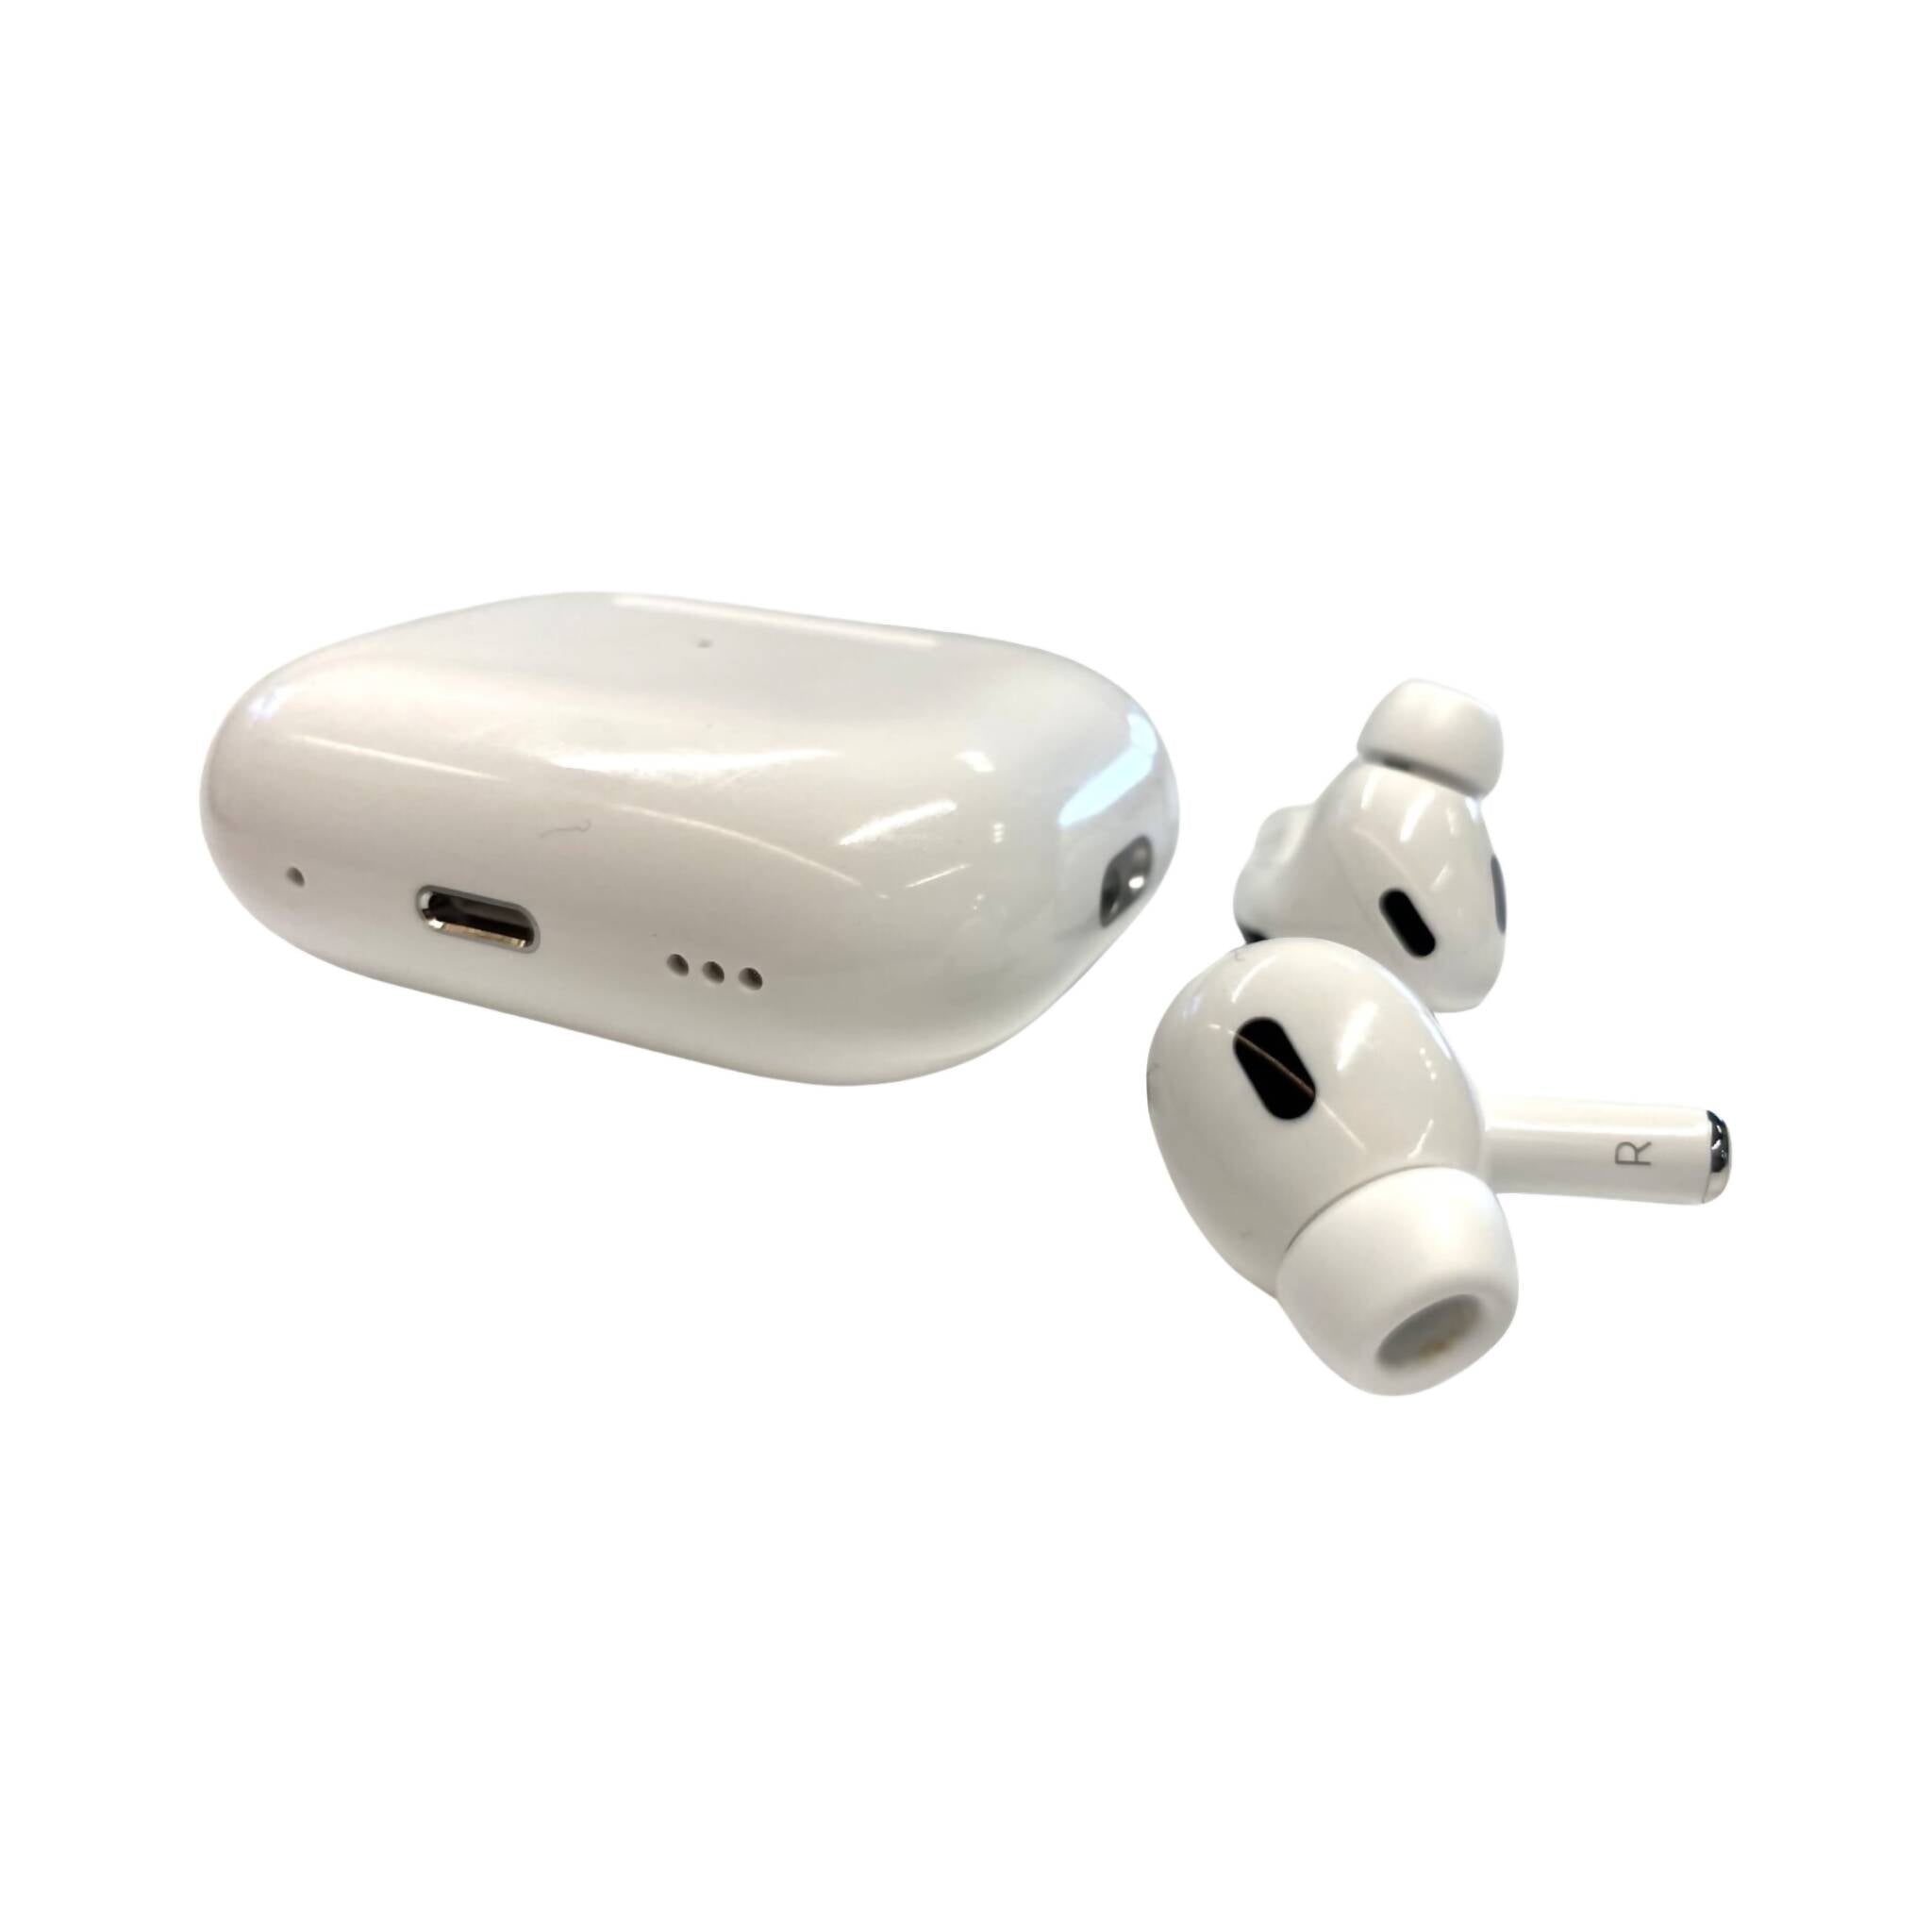 Airpods Pro 2, Active Noise Cancellation & Advanced Features